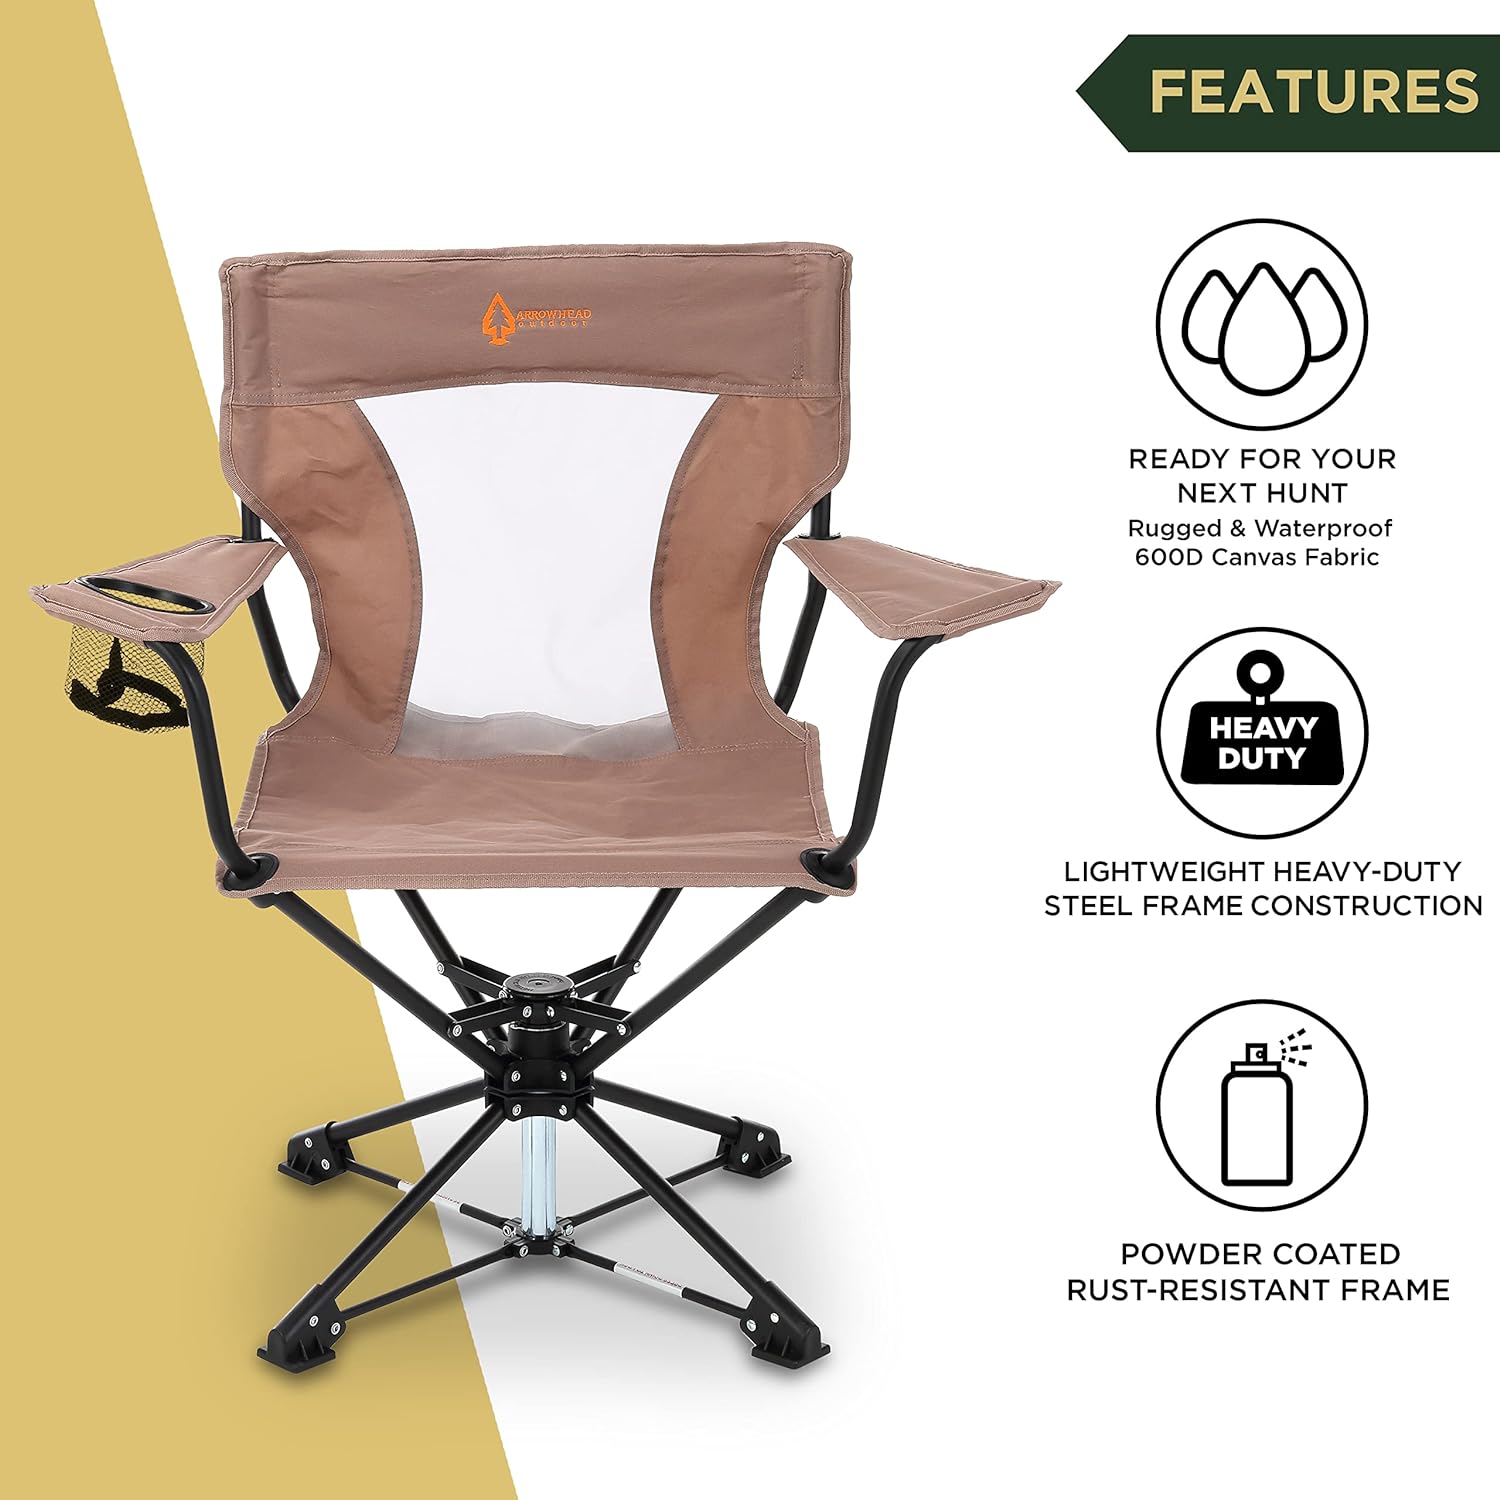 360° Degree Swivel Hunting Chair with Armrests – Arrowhead Outdoor